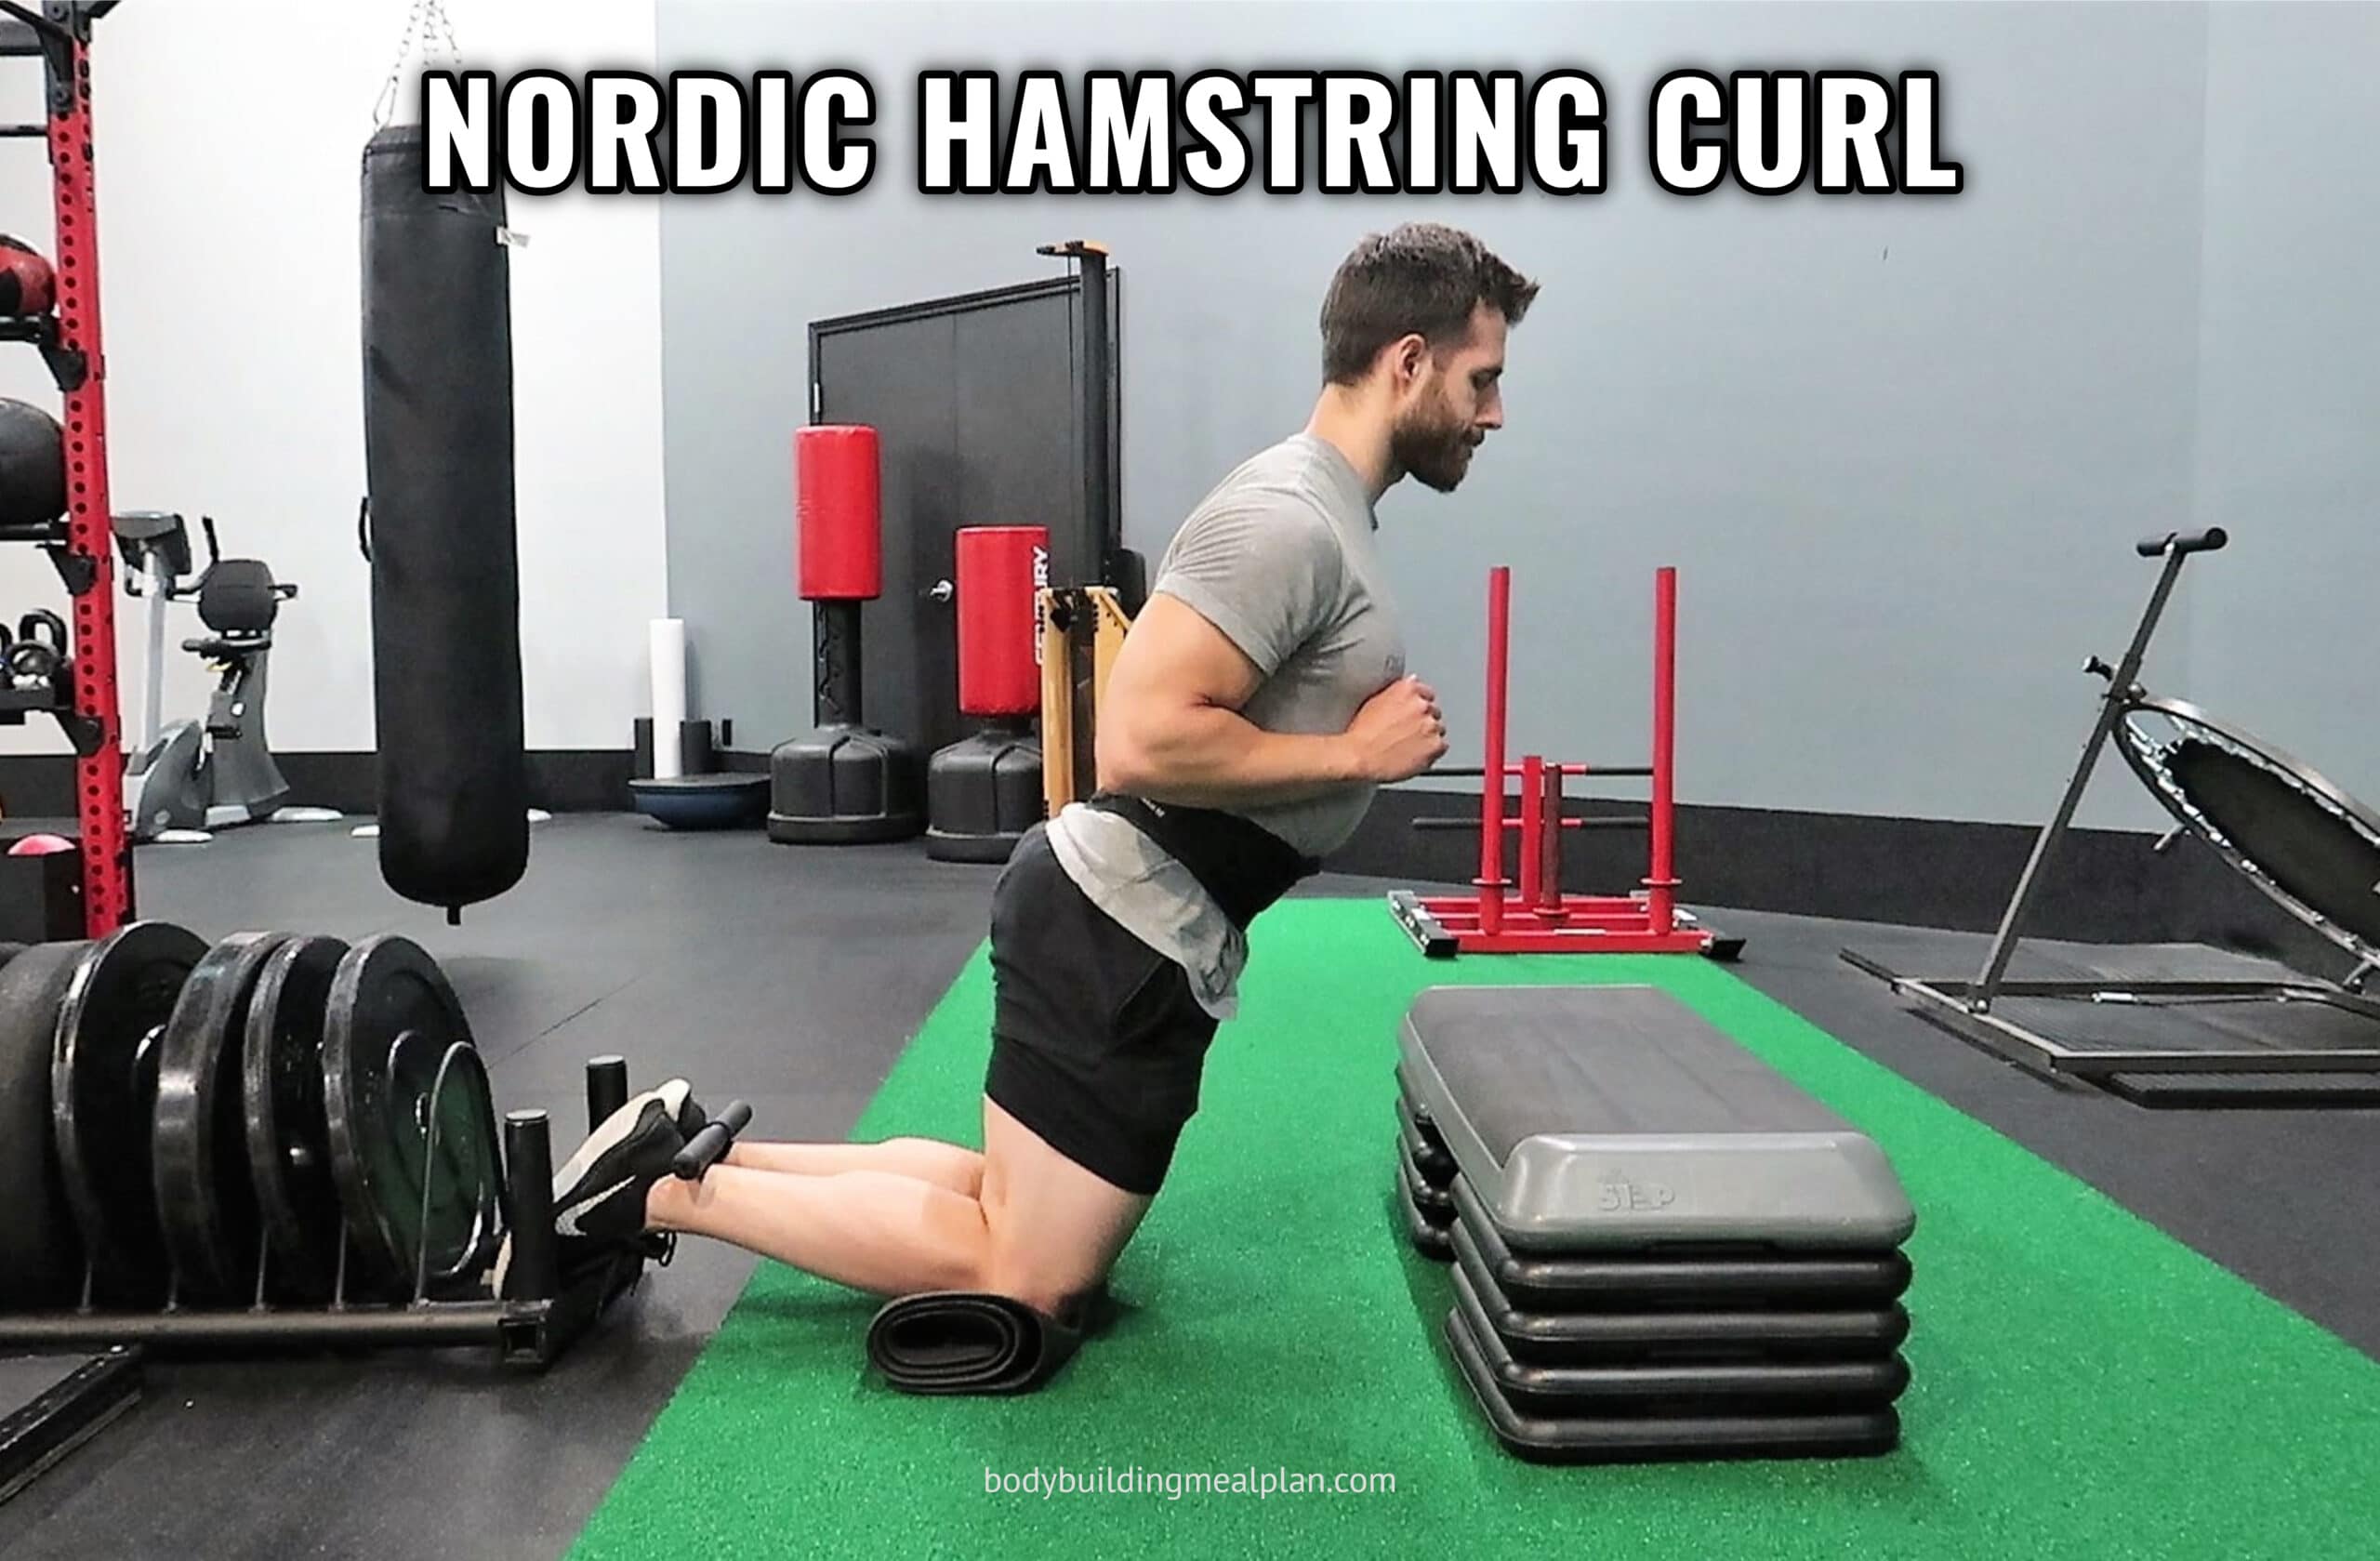 Nordic Hamstring Curl Do Nordic Curls With Band | atelier-yuwa.ciao.jp